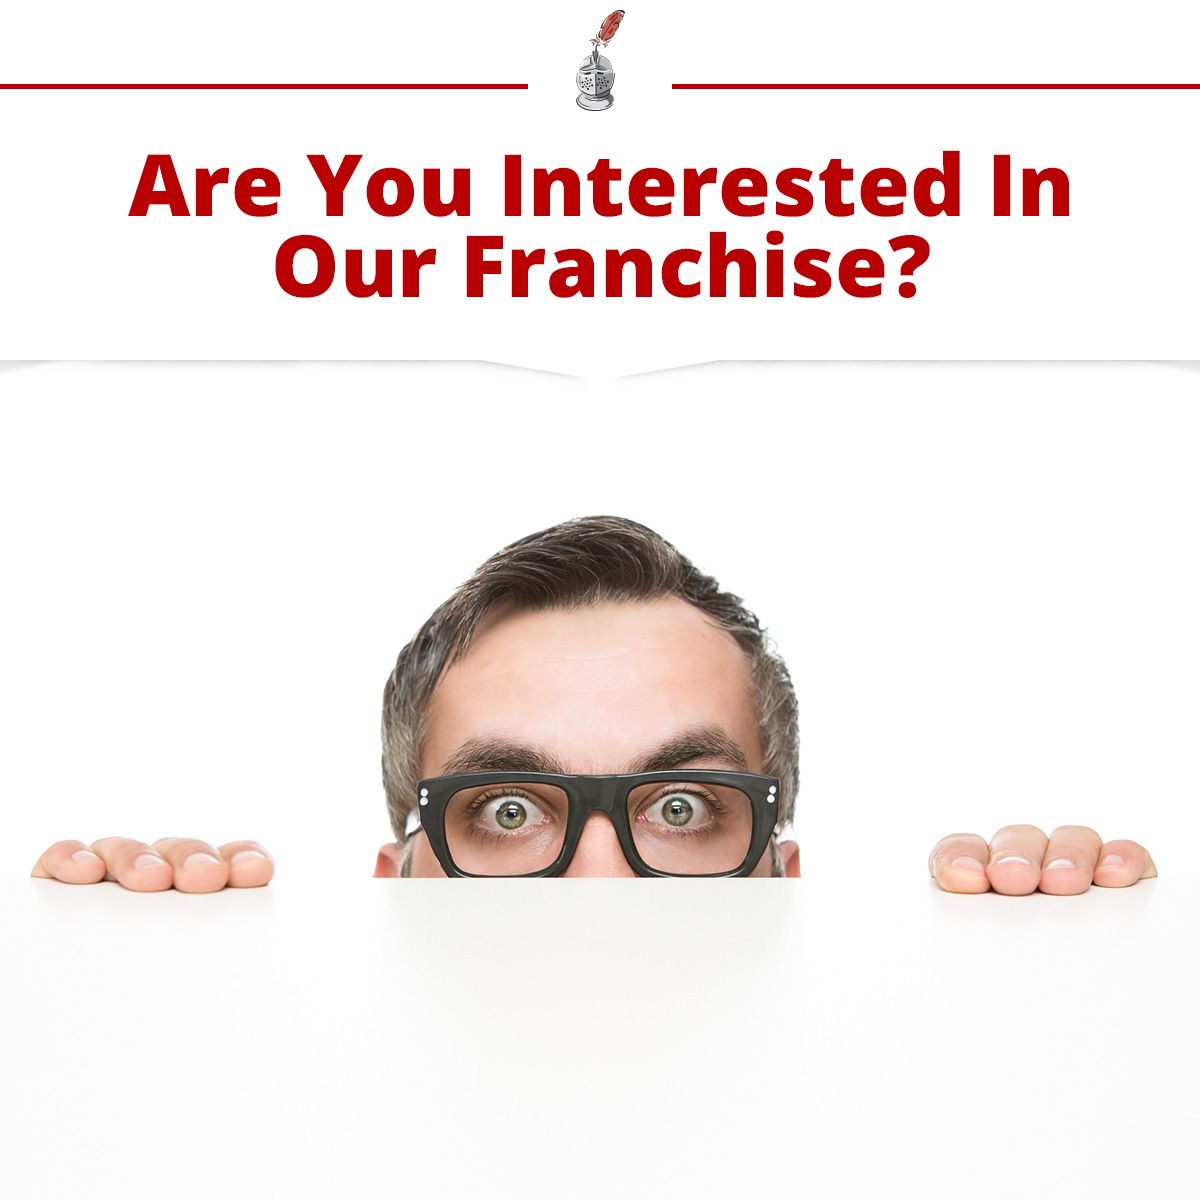 Are You Interested In Our Franchise?